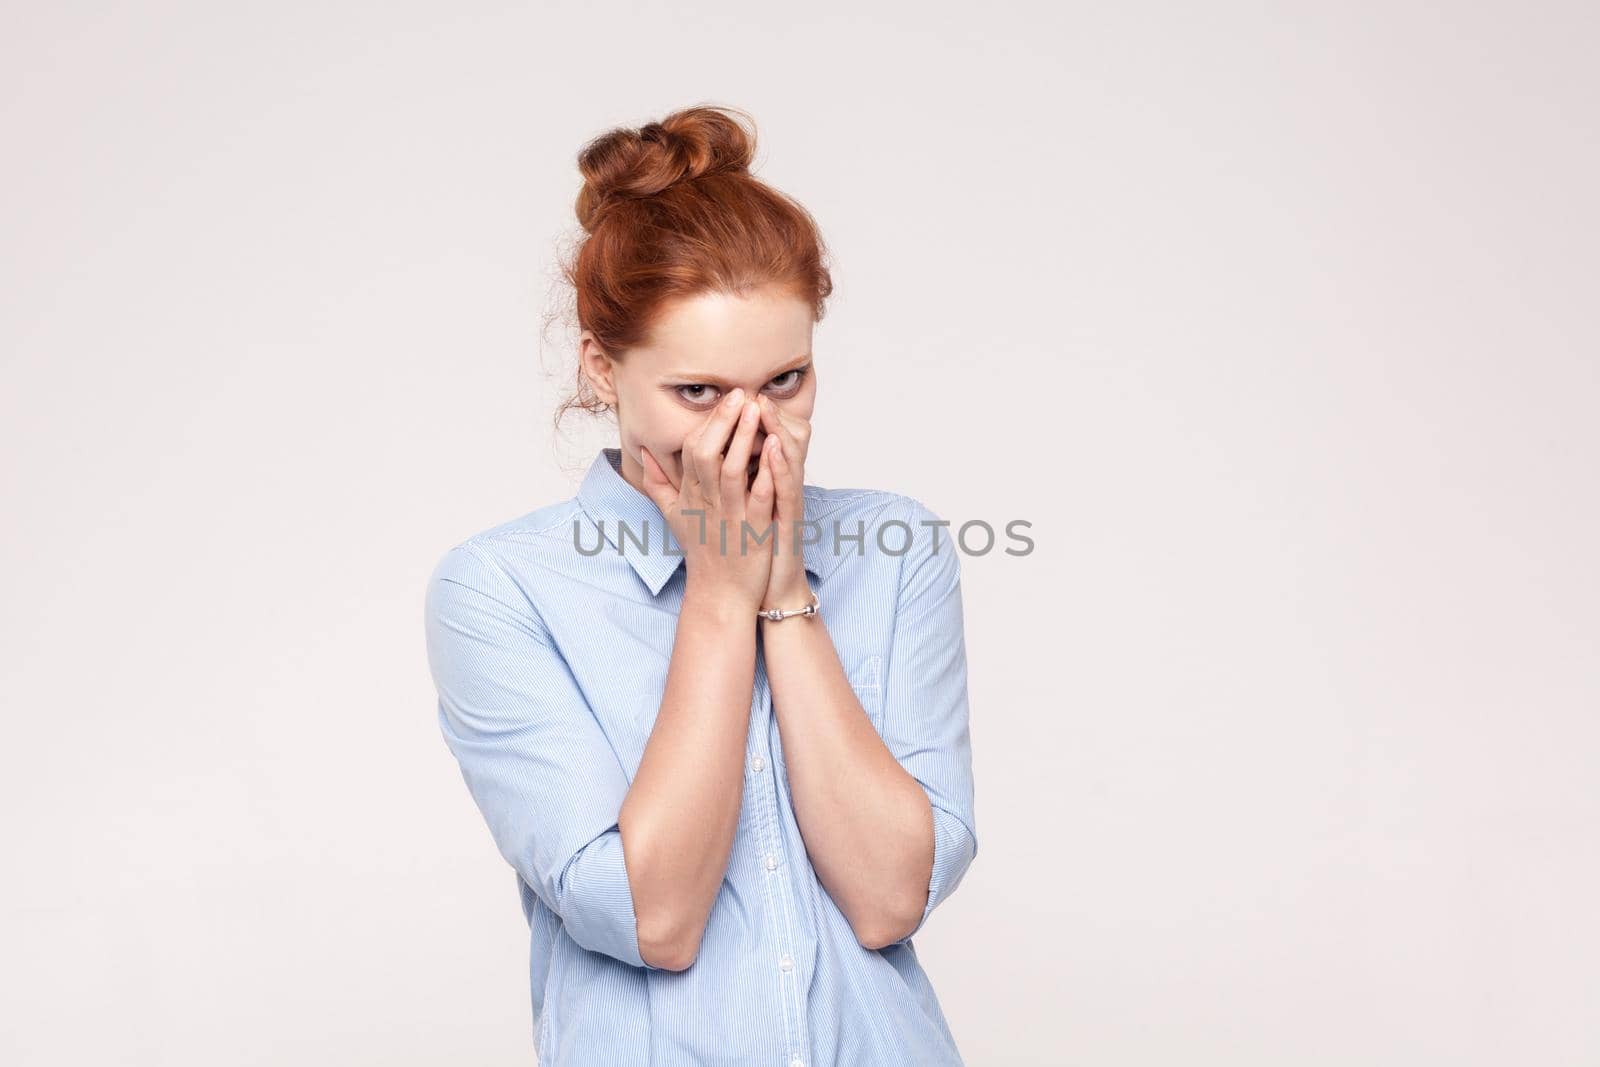 Shame and liar concept. Red haired woman covering mouth with both hands keeping a secret and little smiling. Beautiful redhead woman in blue shirt. Isolated studio shot on gray background.